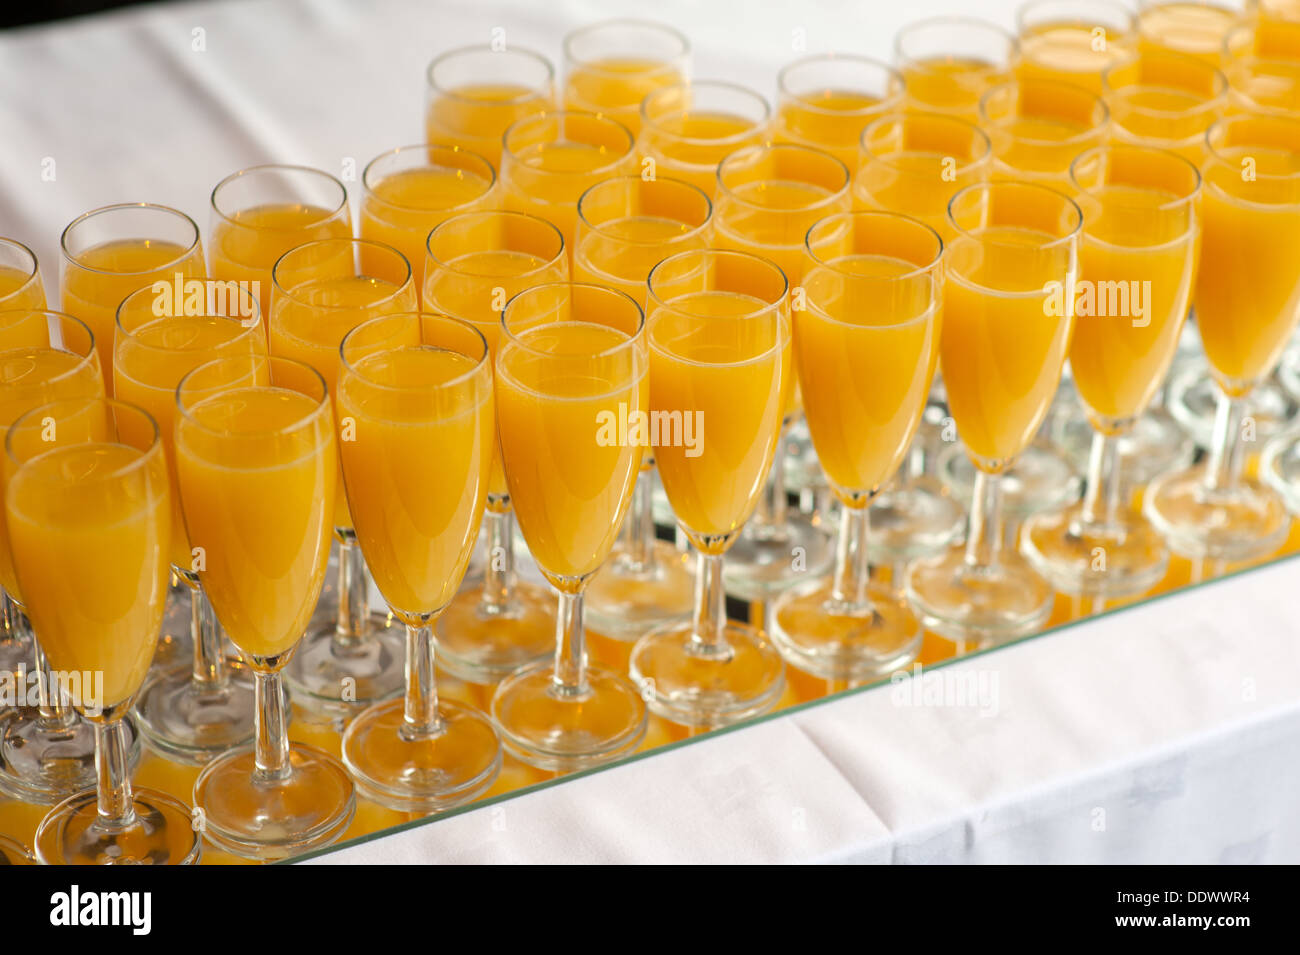 glasses of bucks fizz on a table Stock Photo